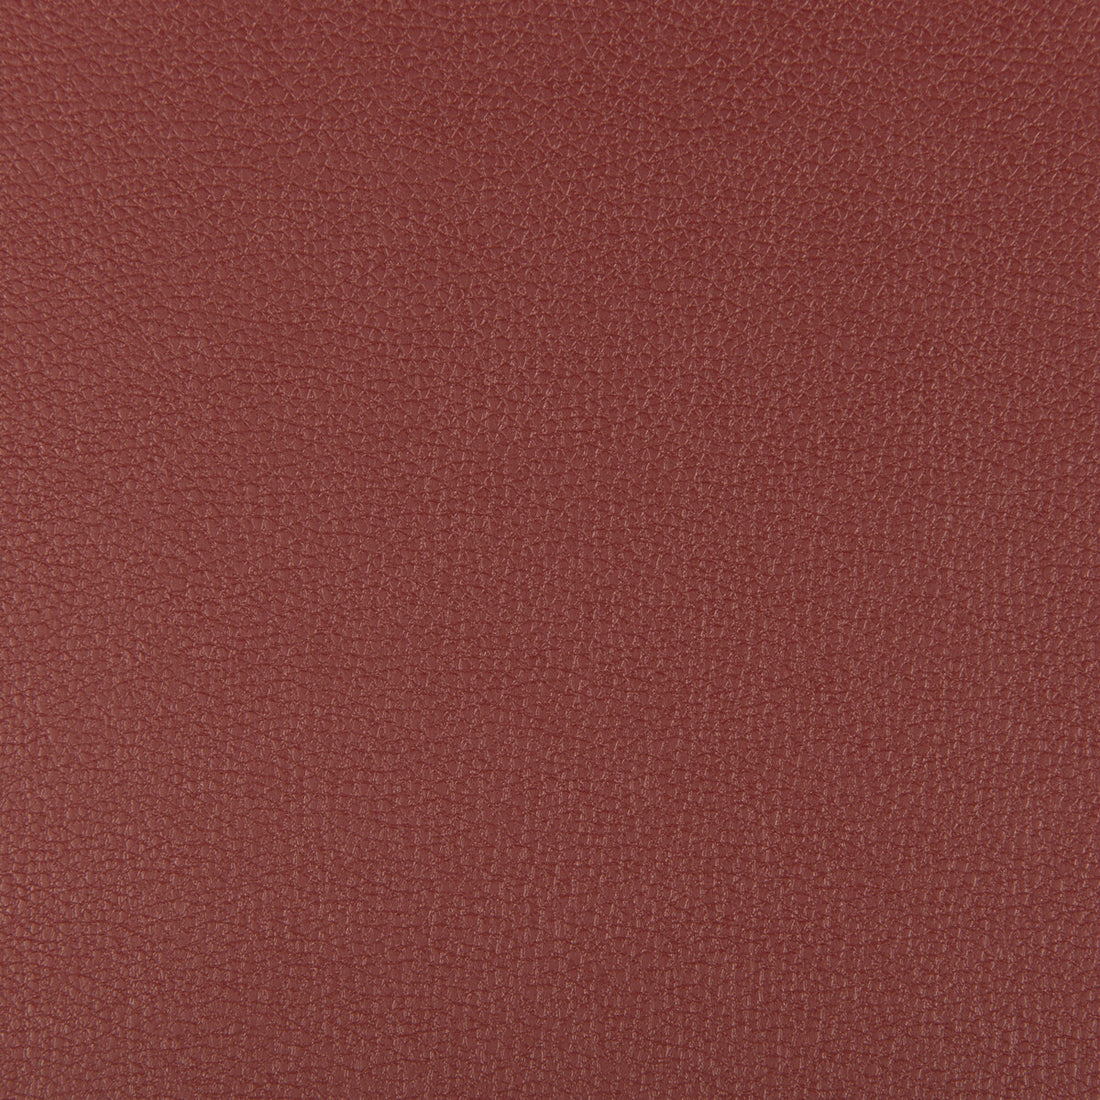 Syrus fabric in raisin color - pattern SYRUS.9.0 - by Kravet Contract